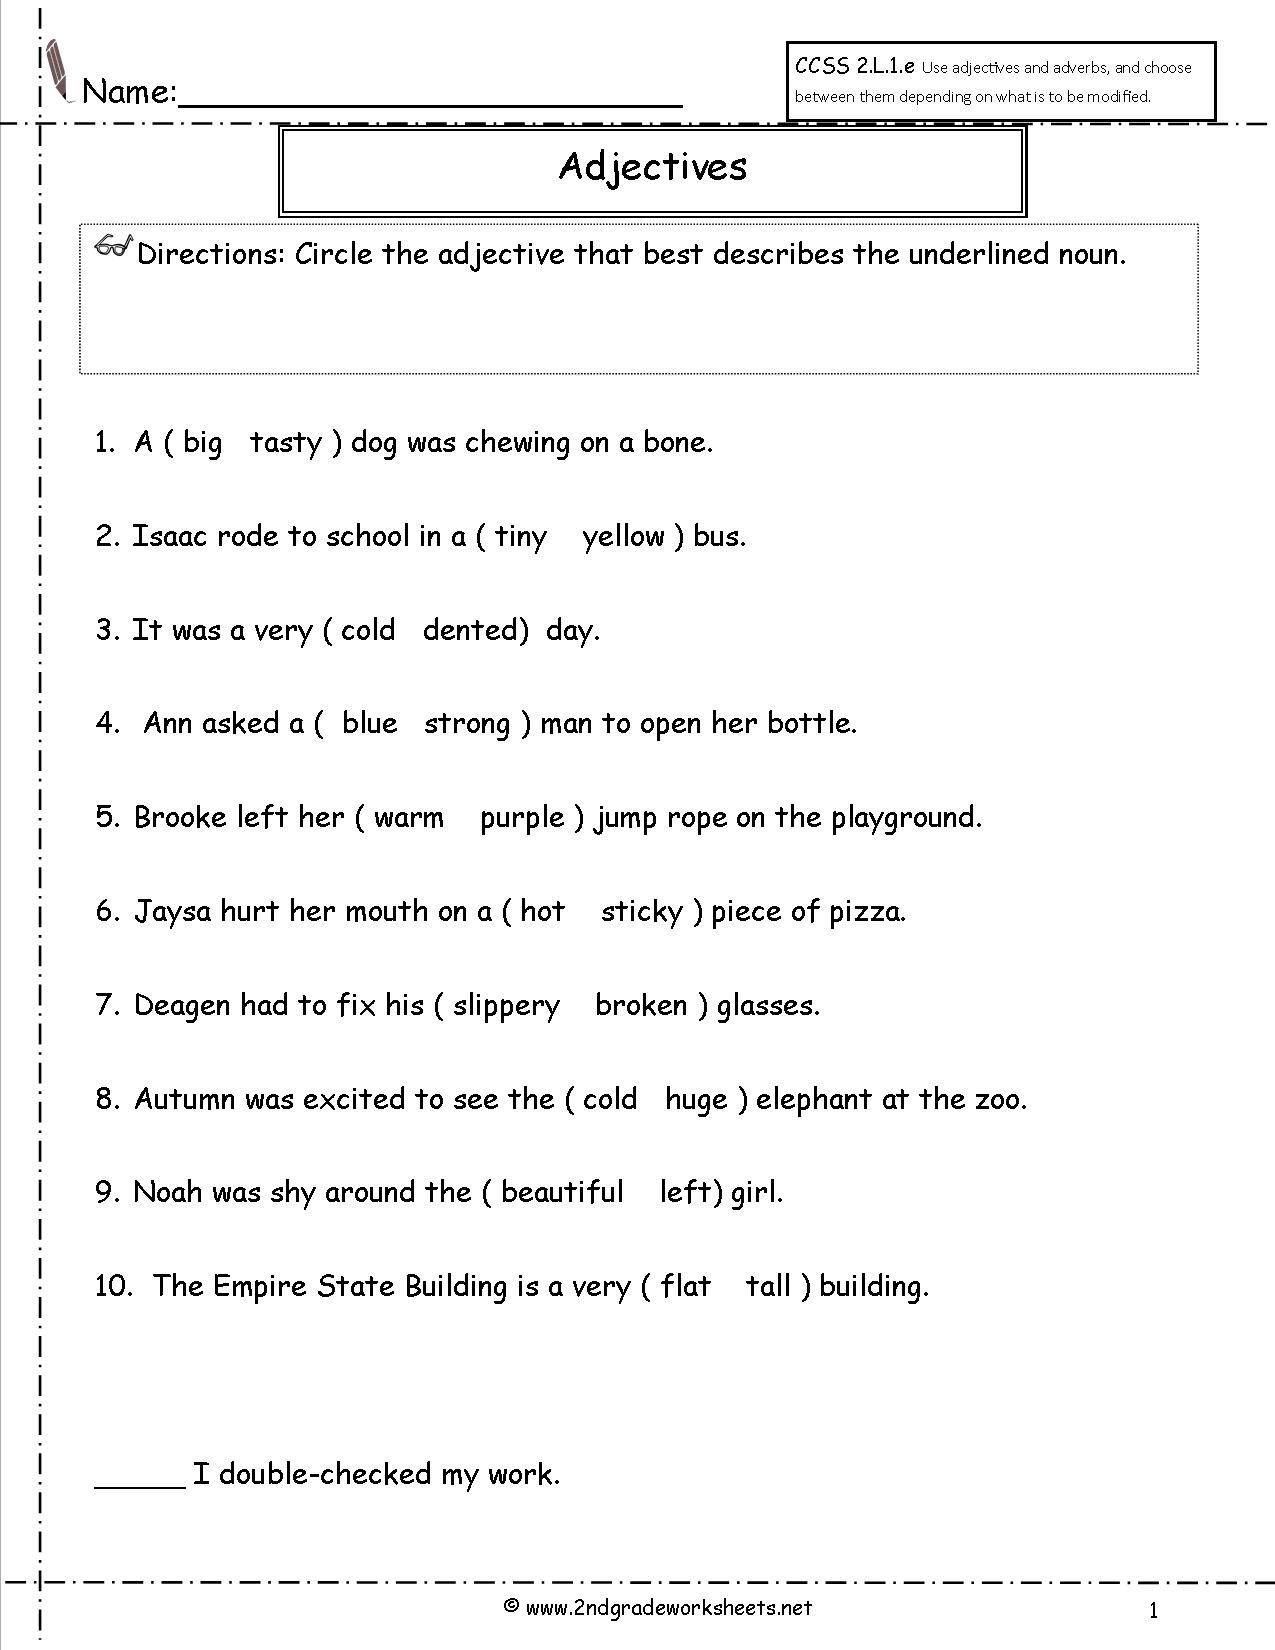 16-best-images-of-adjectives-exercises-worksheets-printable-adjective-worksheets-2nd-grade